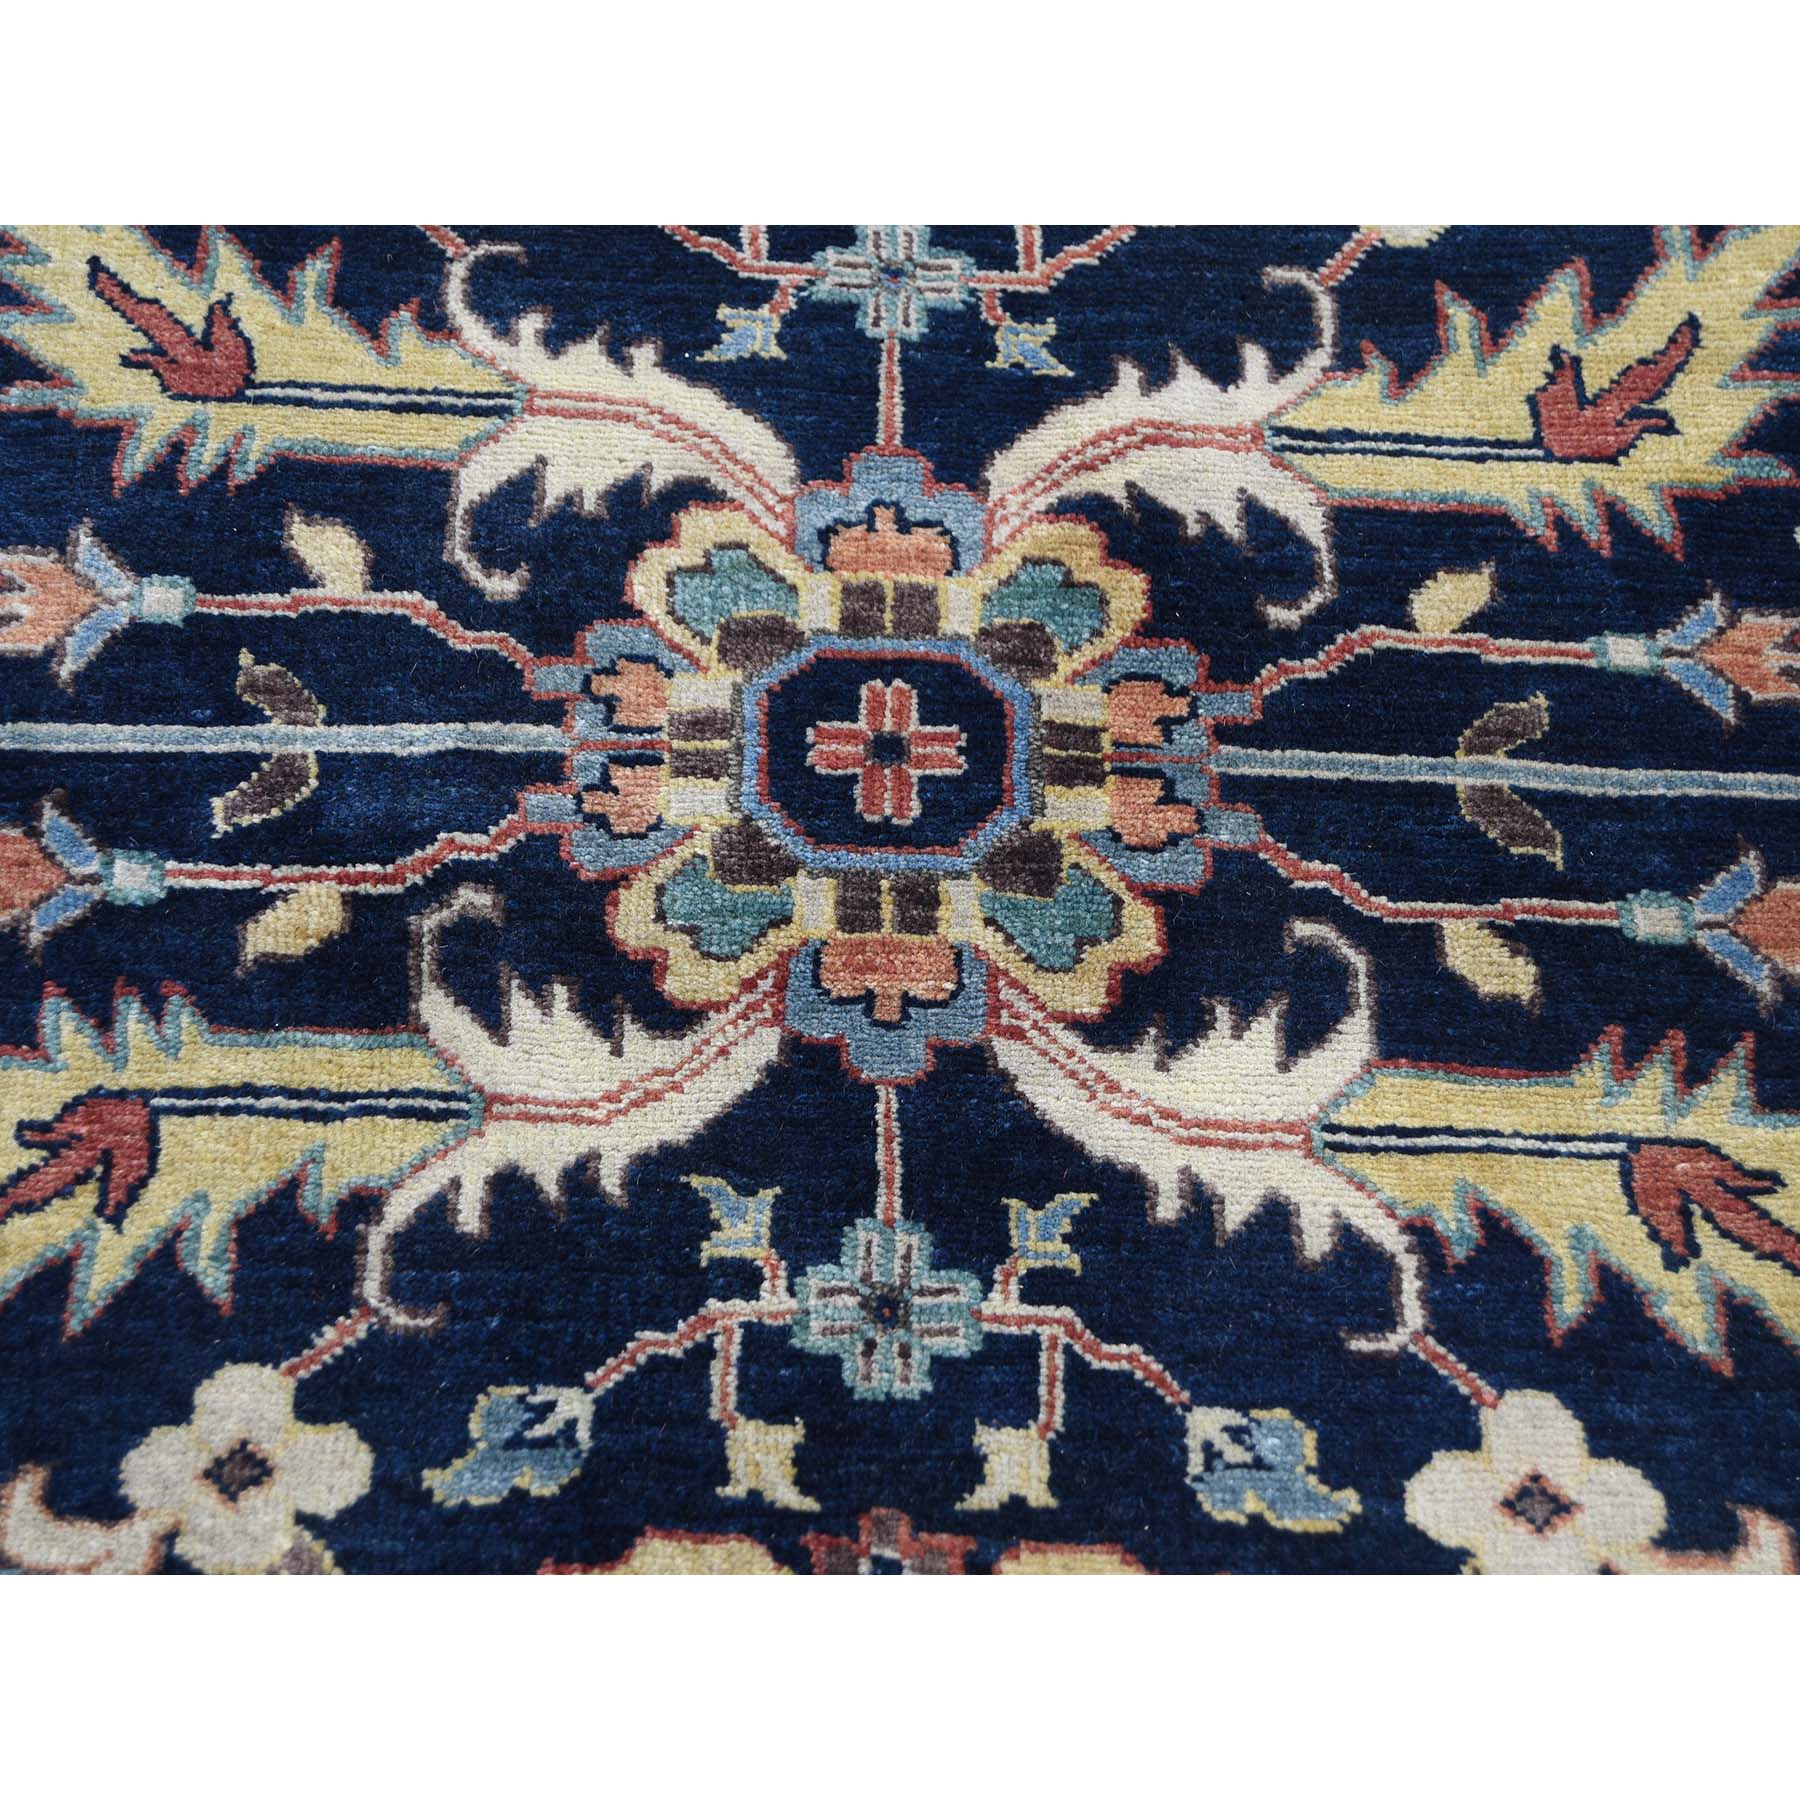 8-10 x11-10  Heriz Re-Creation All Over Design Pure Wool Hand-Knotted Oriental Rug 